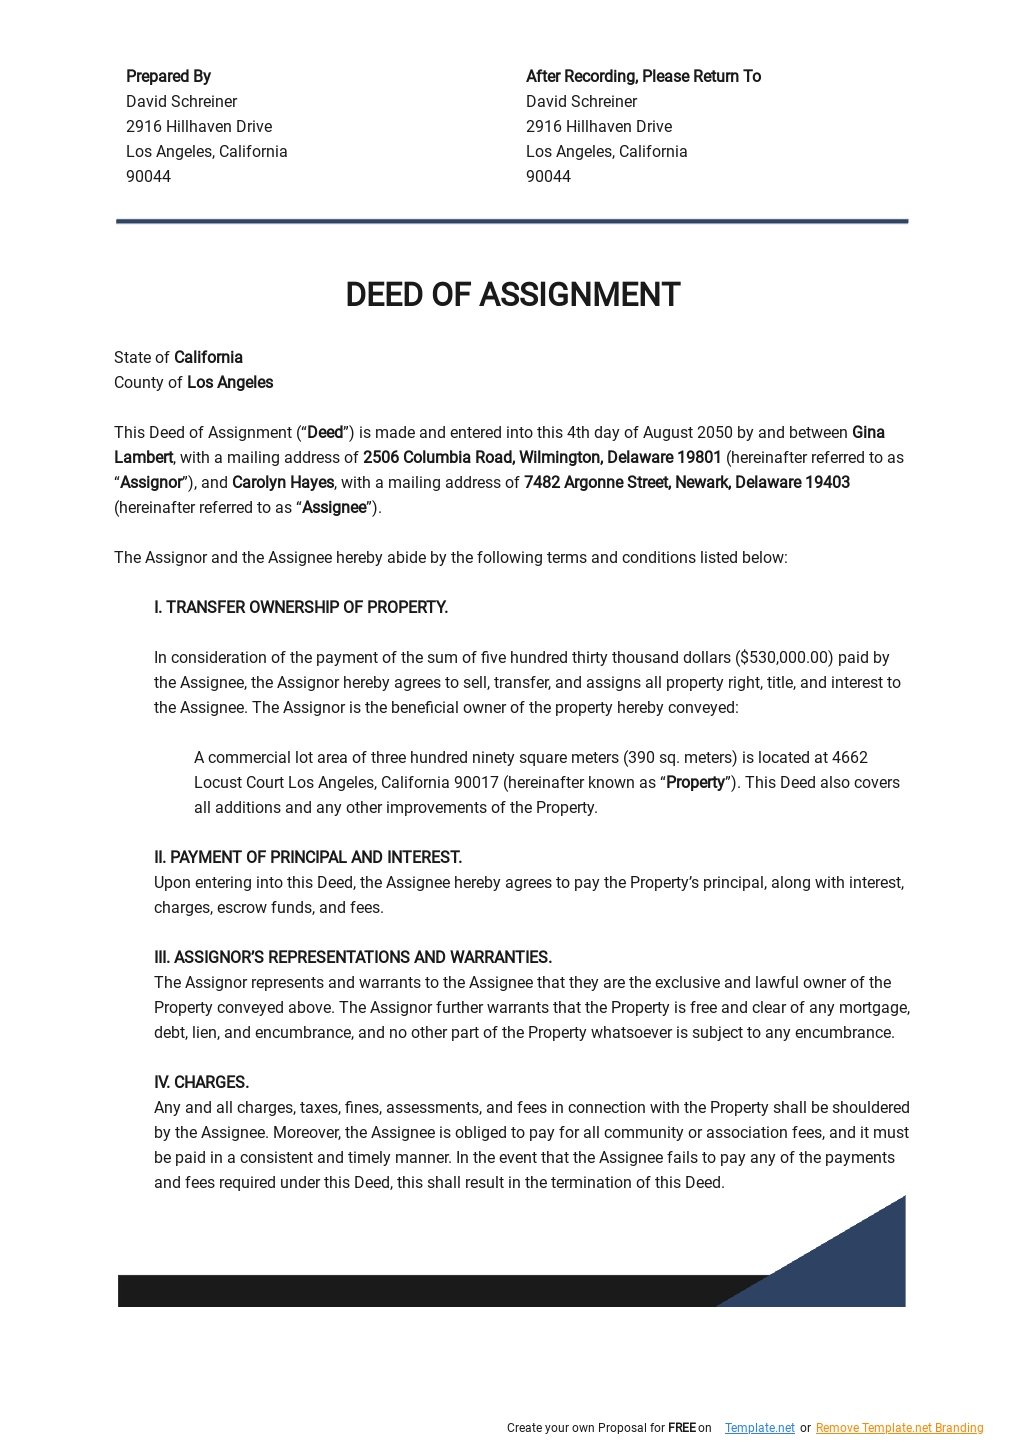 deed of assignment plc